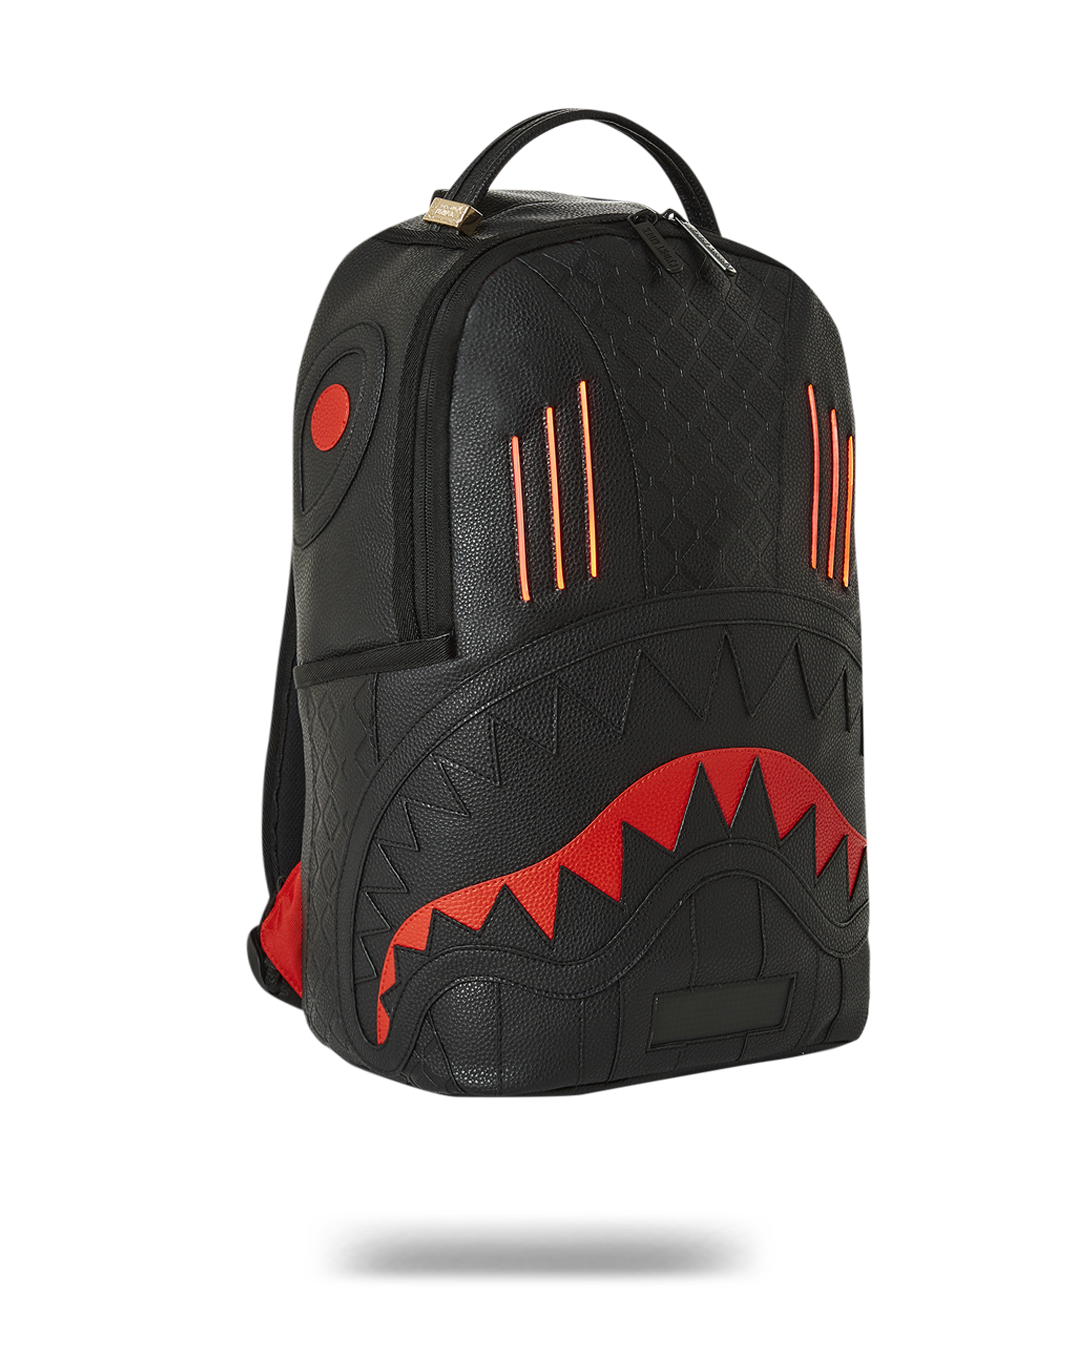 KNIGHT RIDER LED DLXVF BACKPACK